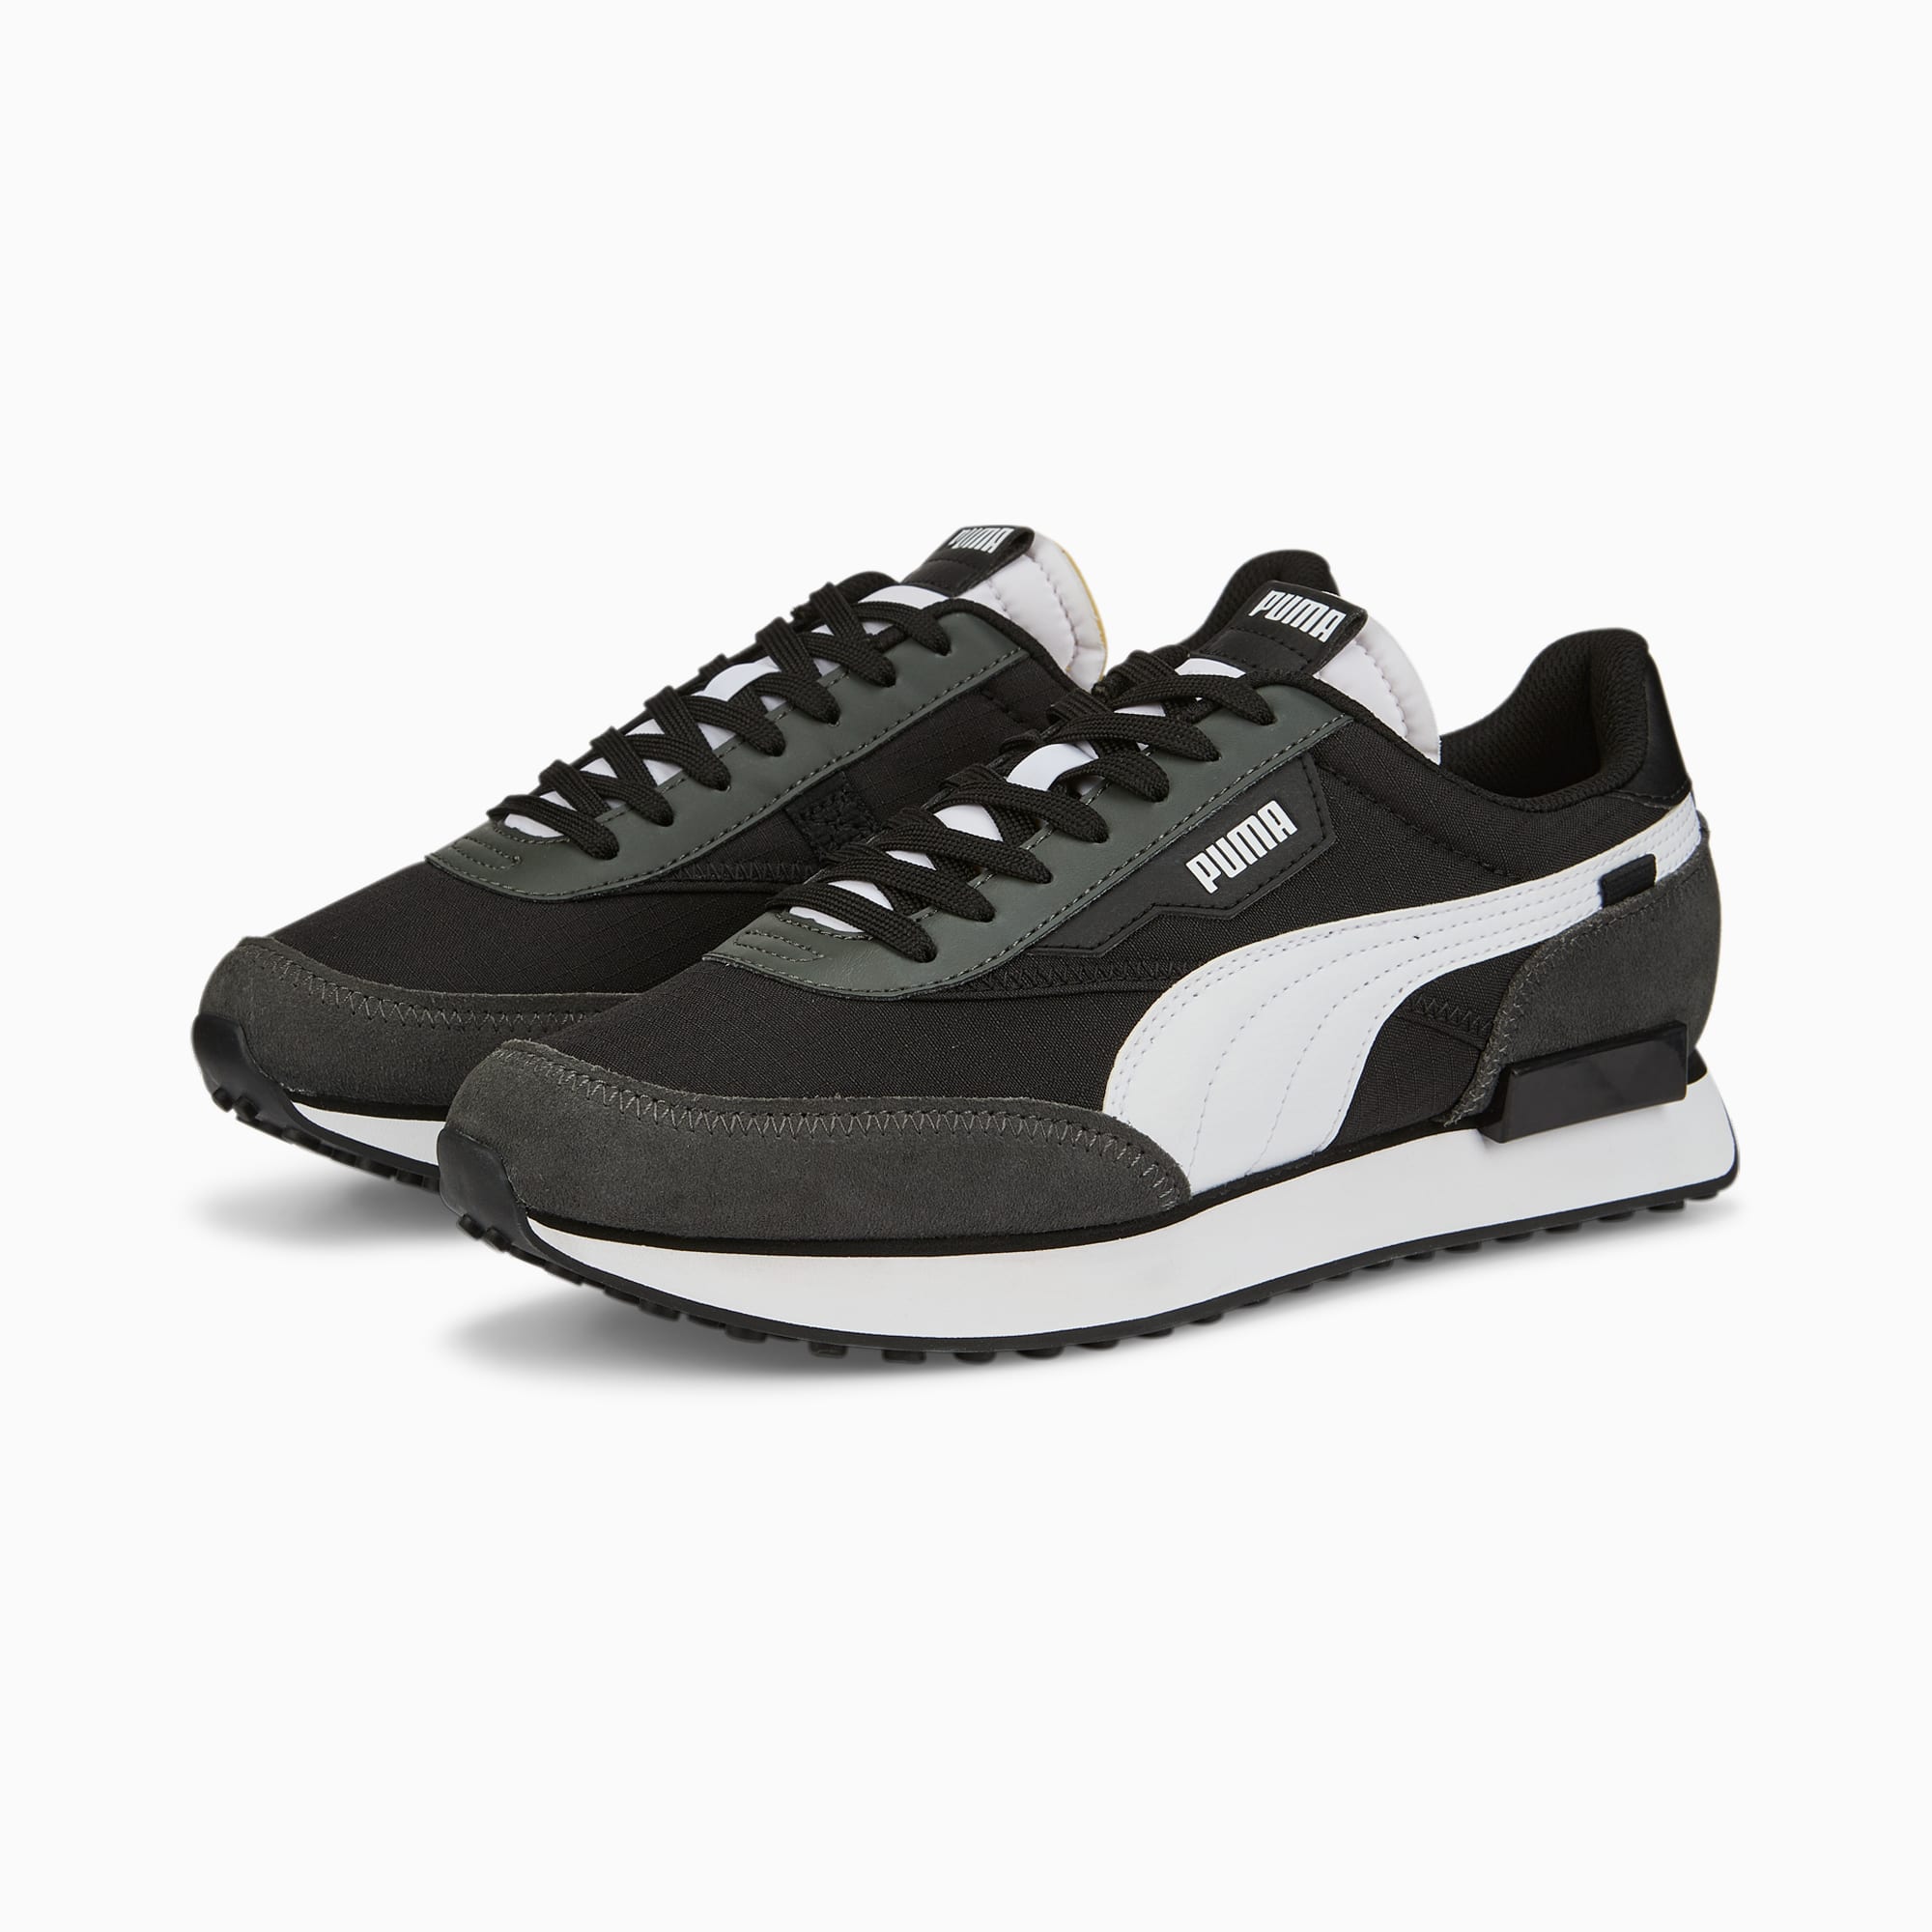 PUMA Chaussure Sneakers Rider Play On Pour Homme, Noir